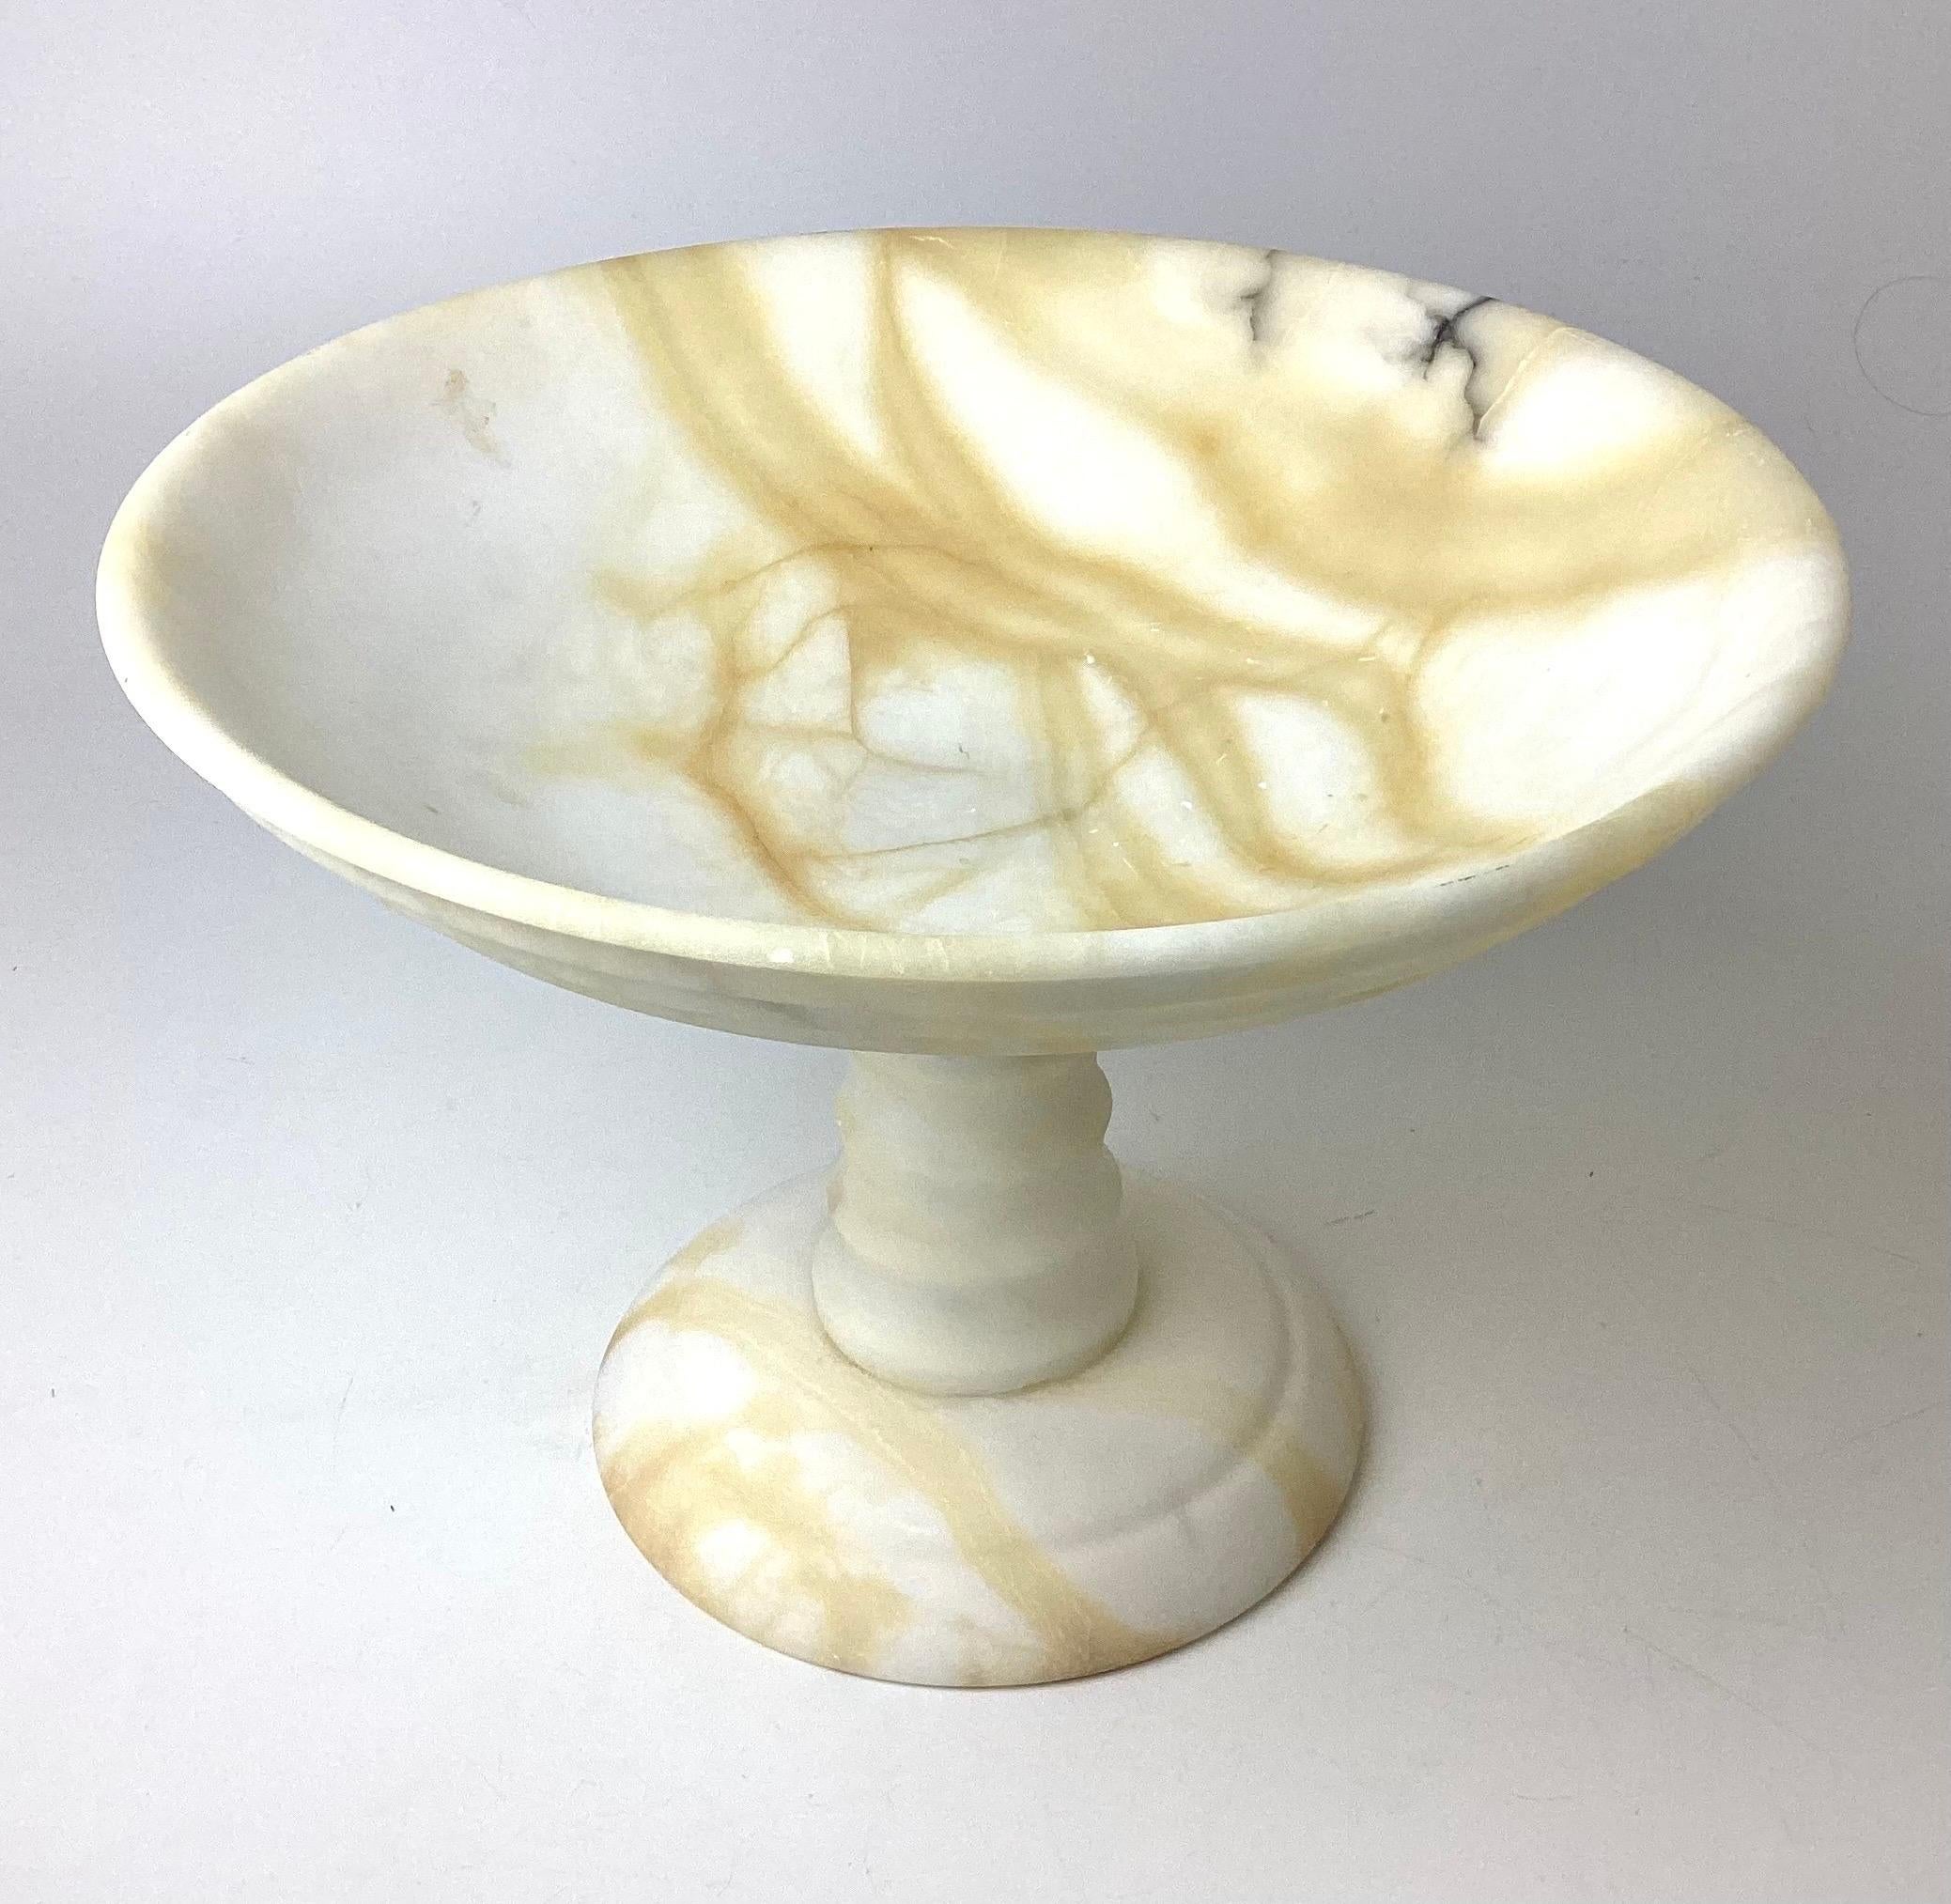 Italian white and brown Alabaster marble Tazza Compote bowl. Nicely carved neck. Made in 3 parts. 8 1/4